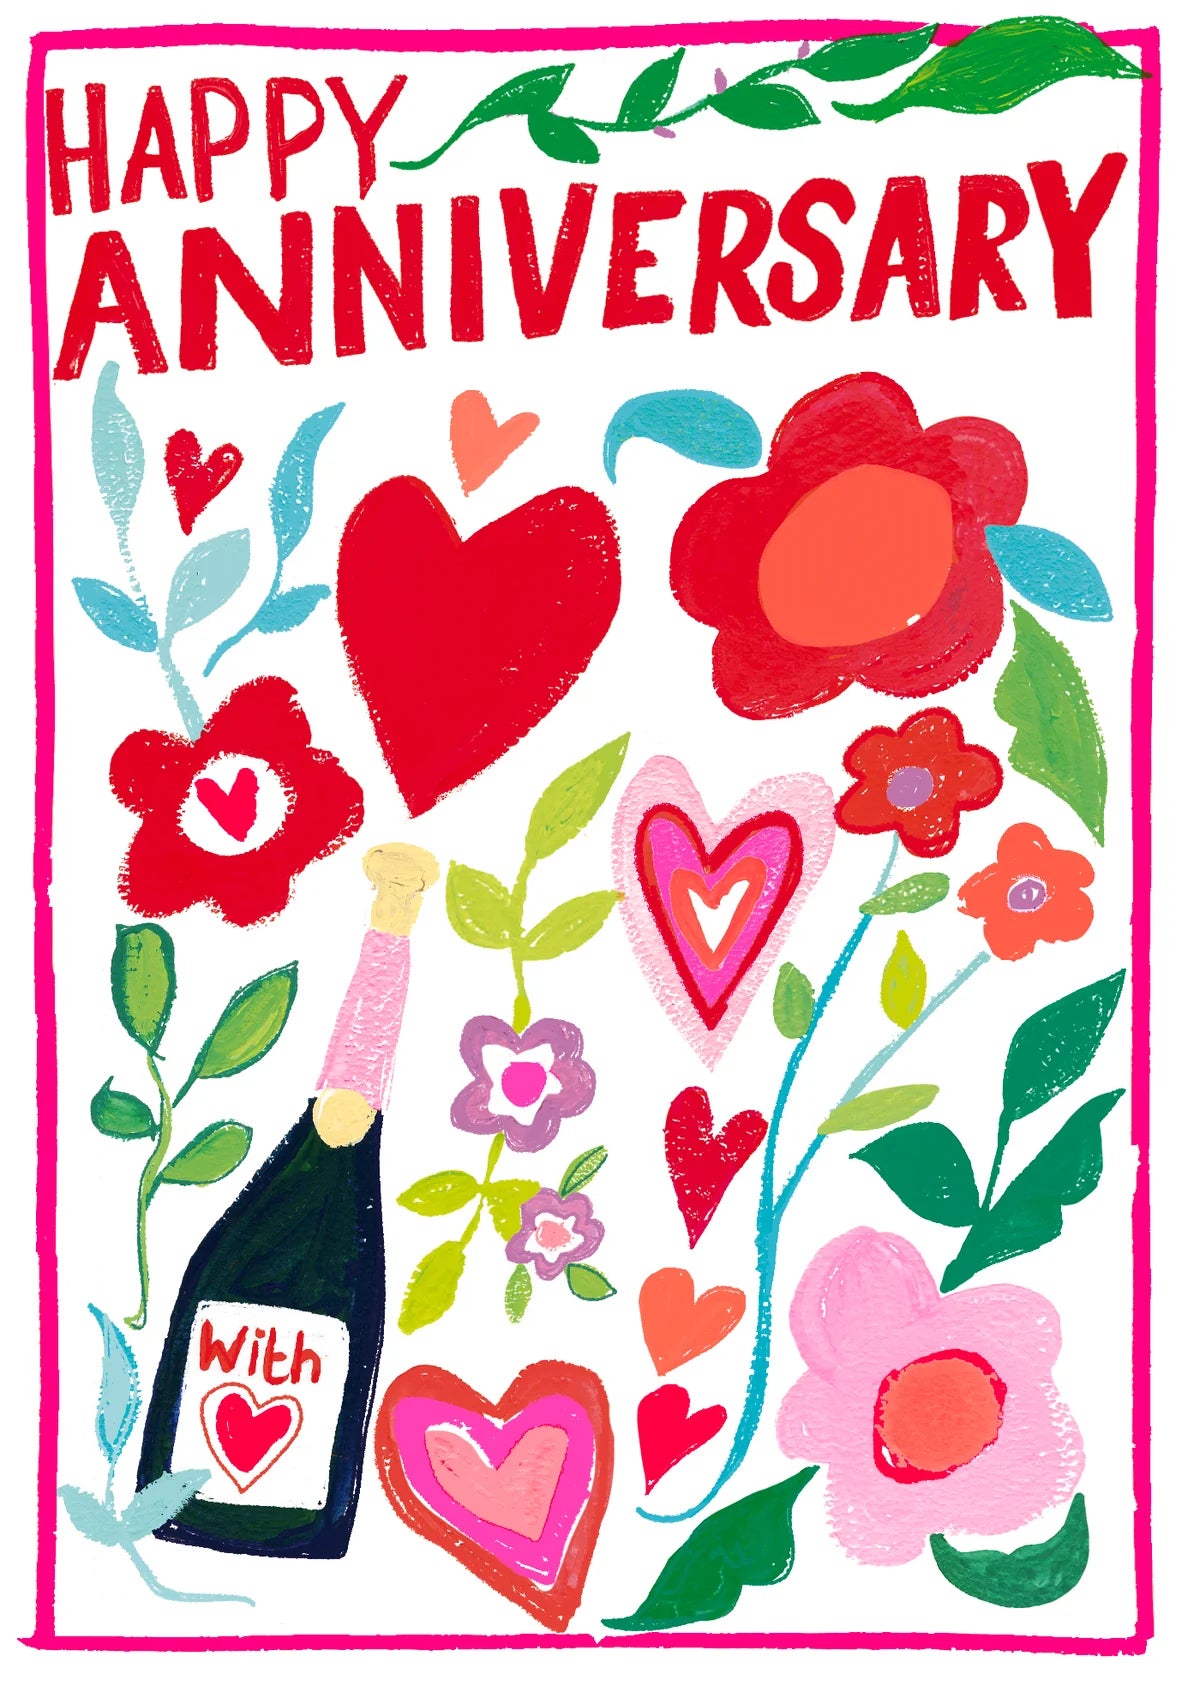 HAPPY ANNIVERSARY | CARD BY PAPER SALAD